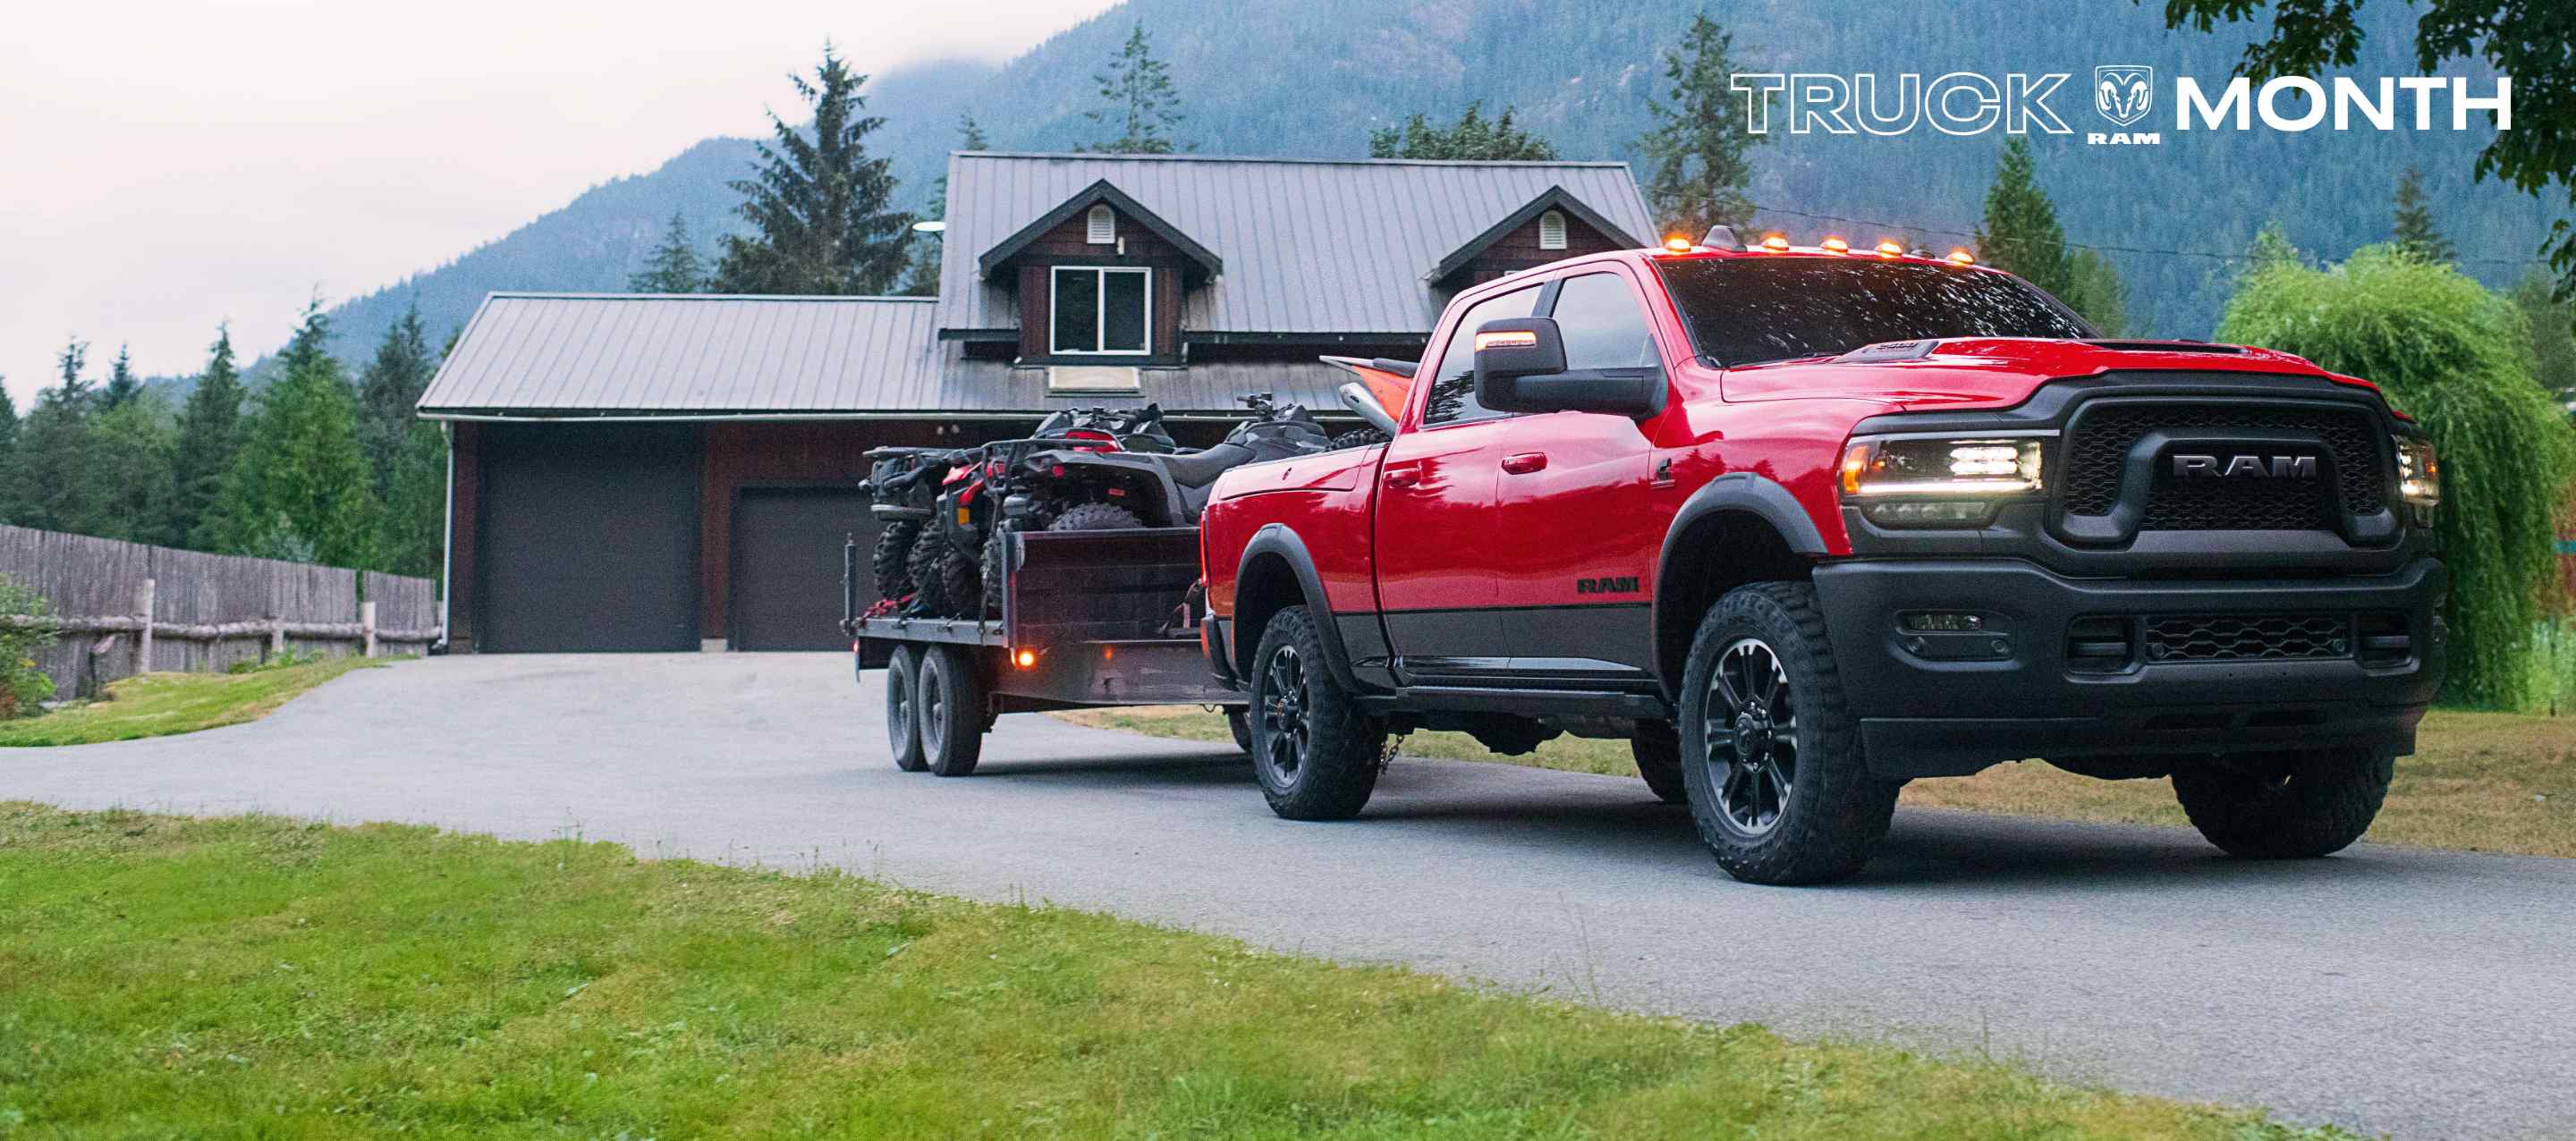 A red Ram 2500 Rebel 4x4 Crew Cab with the diesel engine, pulling away from a home in the mountains while towing two ATVs on a flatbed trailer.